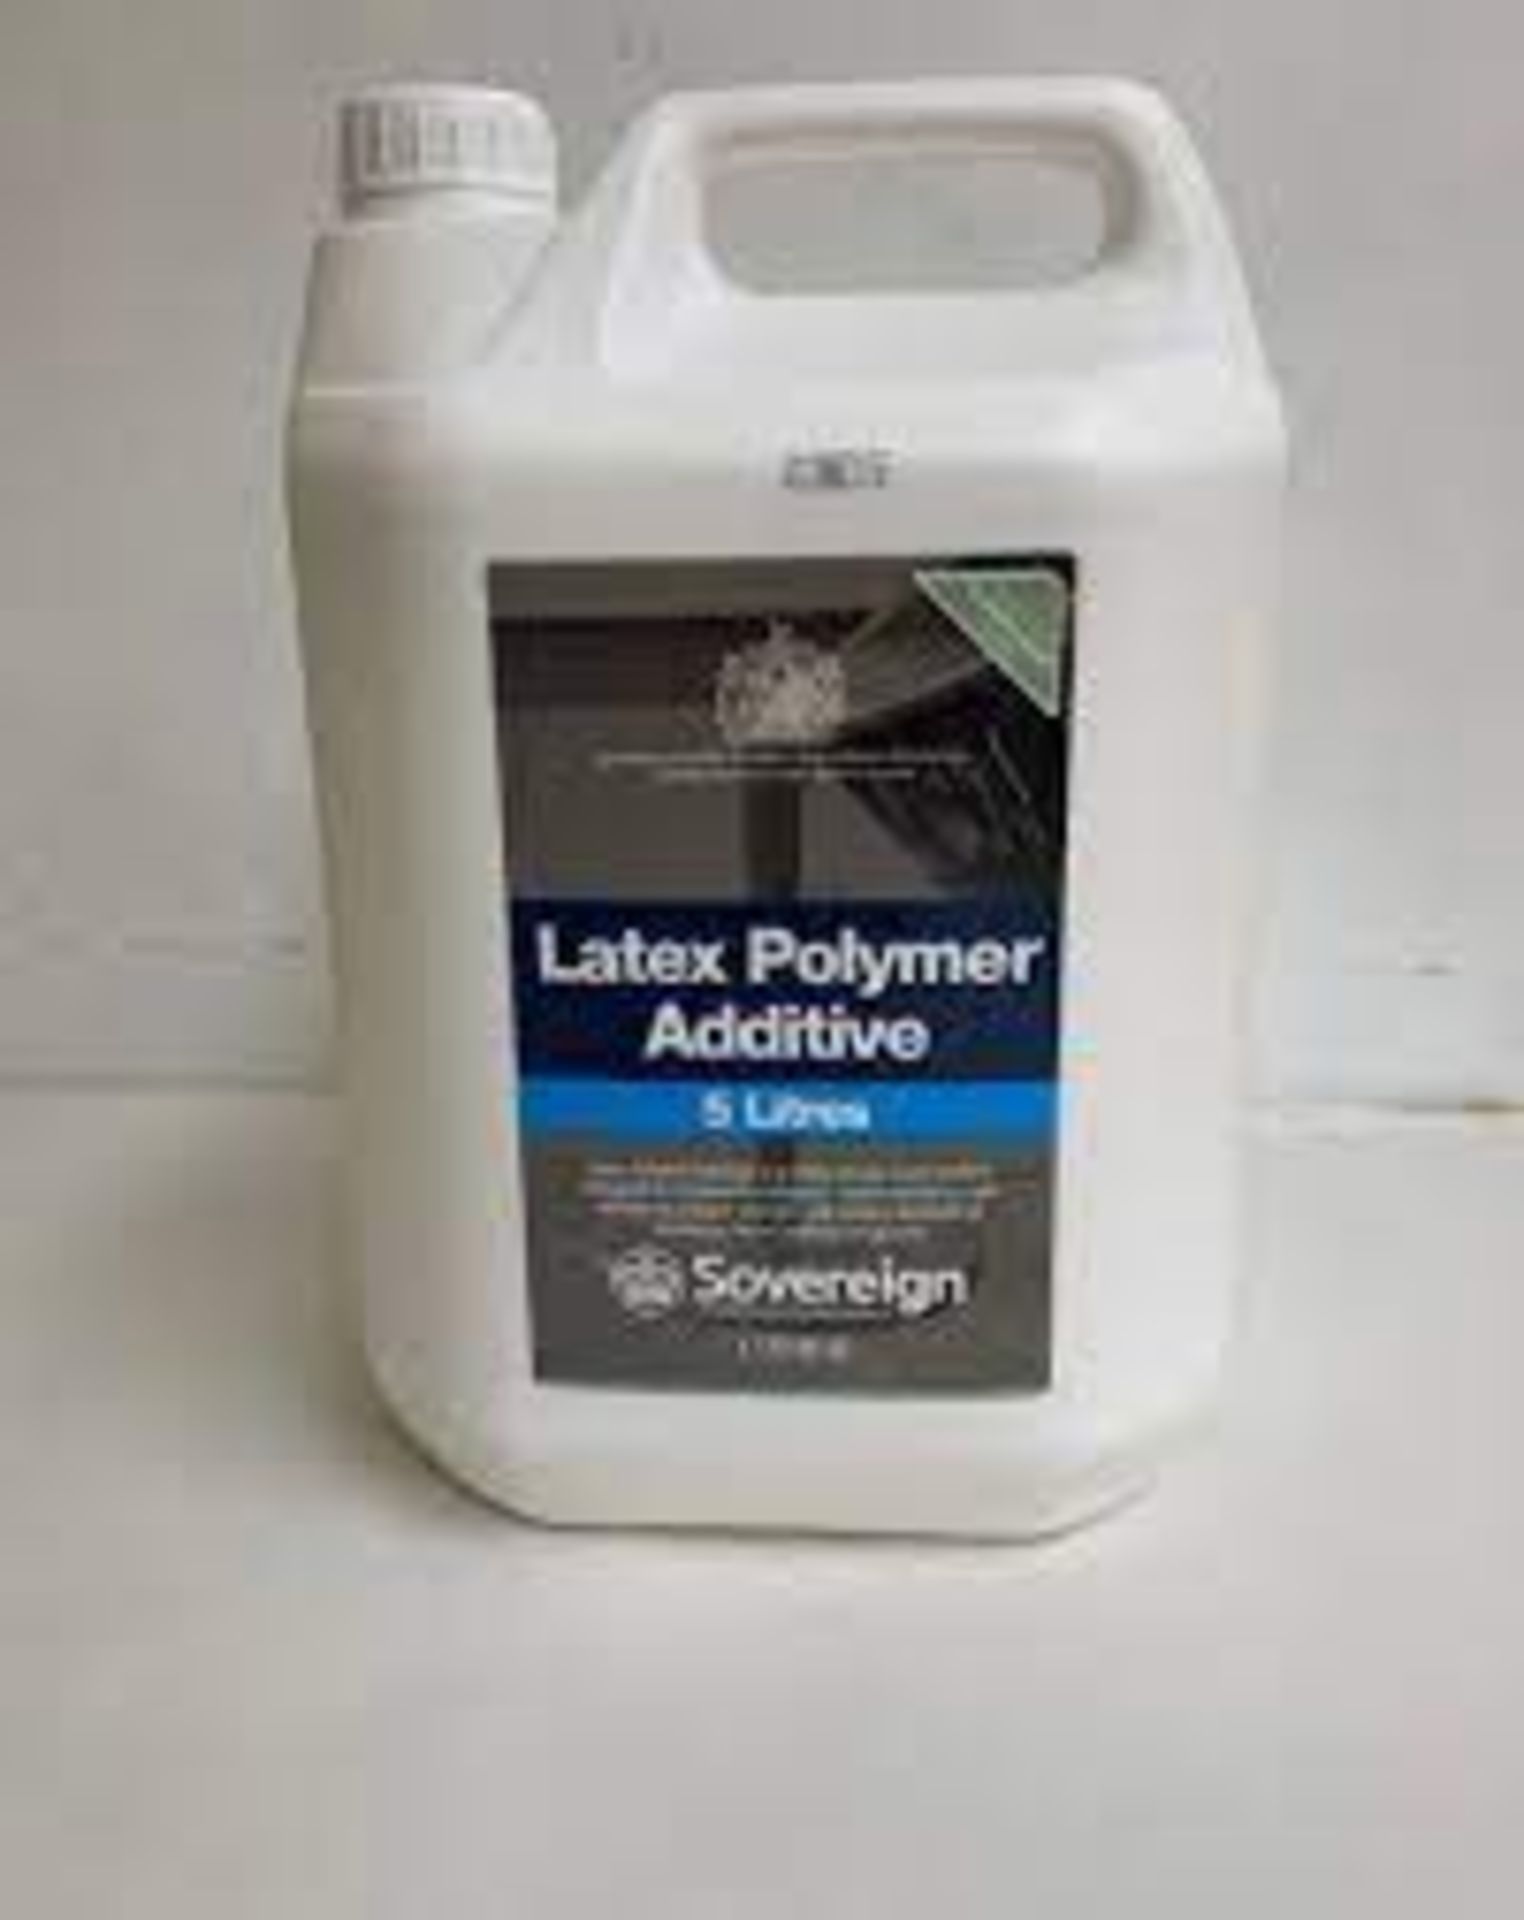 12 x NEW 5L TUBS OF SOVEREIGN LATEX POLYMER ADDITIVE. LATEX POLYMER ADDITIVE IS A READY TO USE